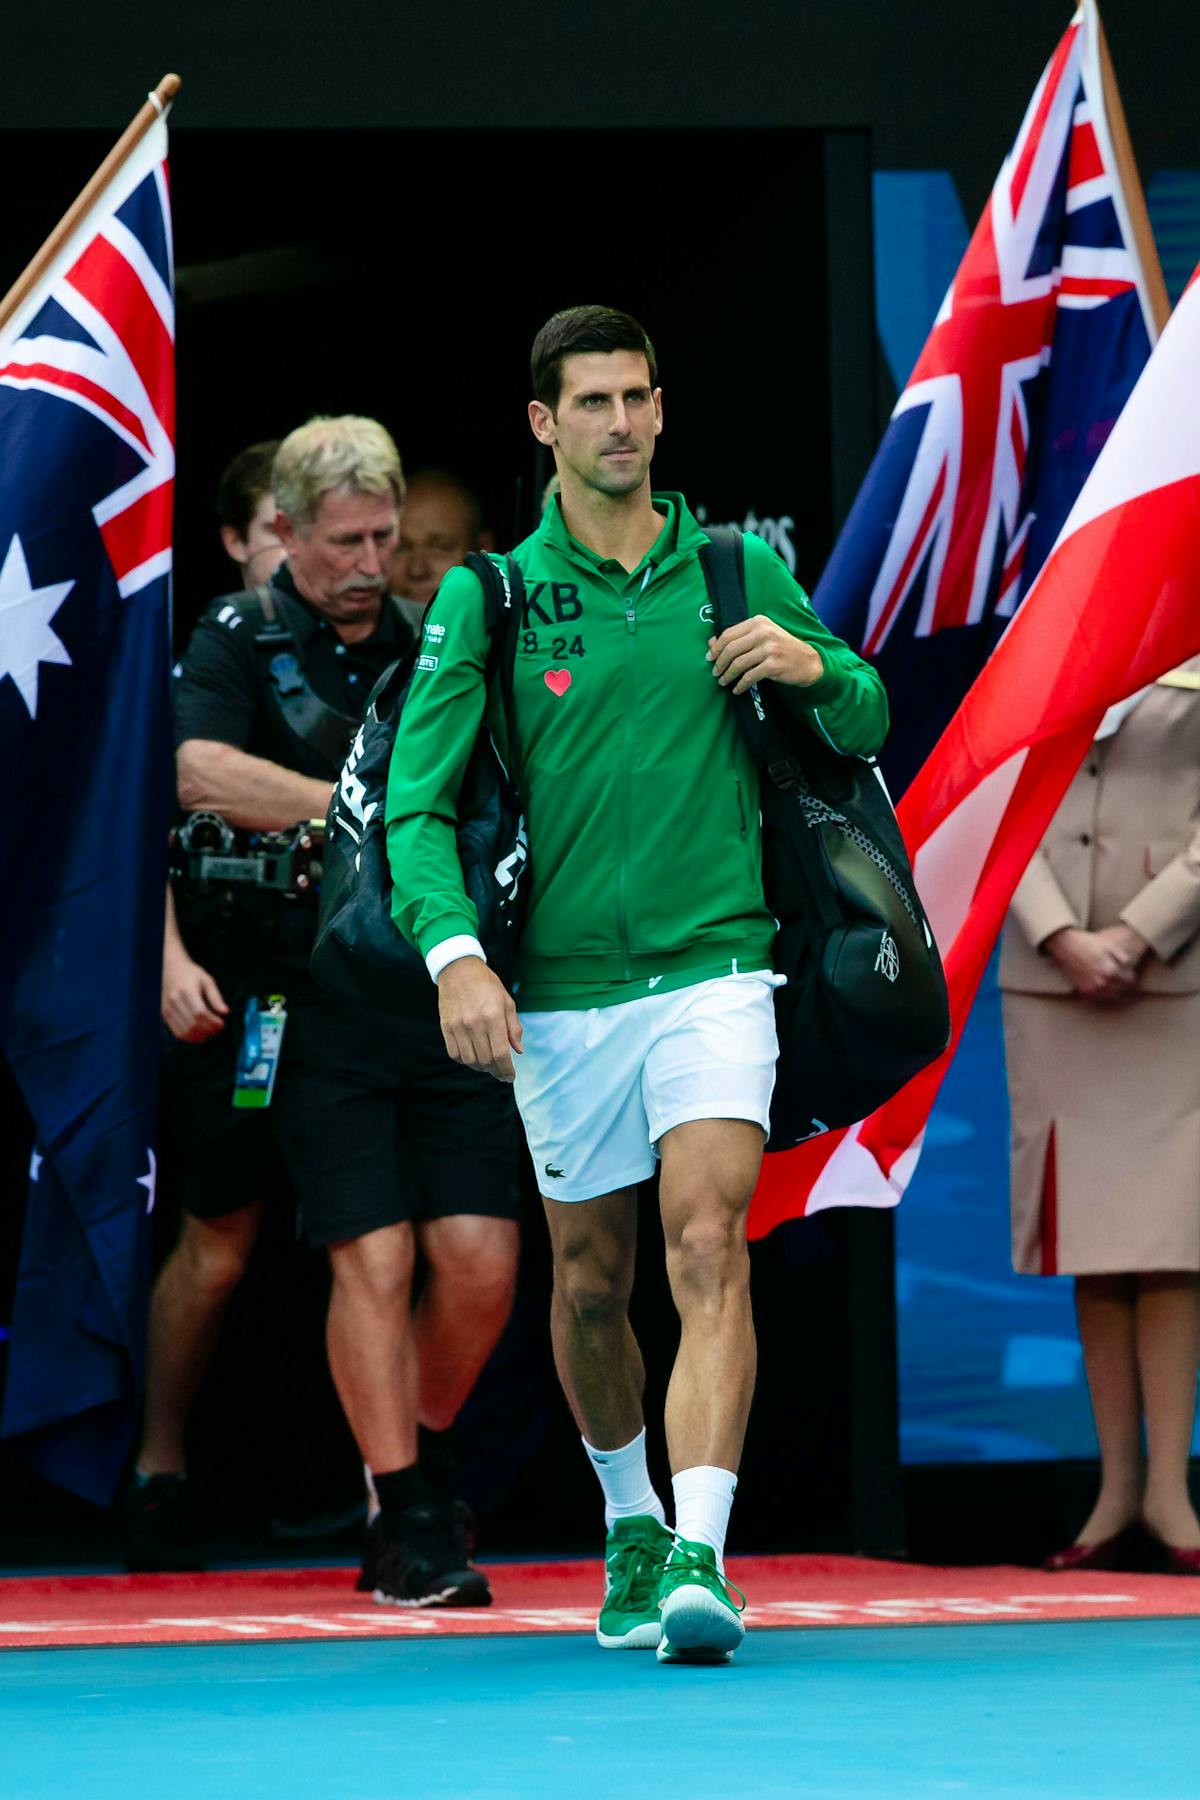 Australian Open 2022: All you need to know about the first Grand Slam of the year